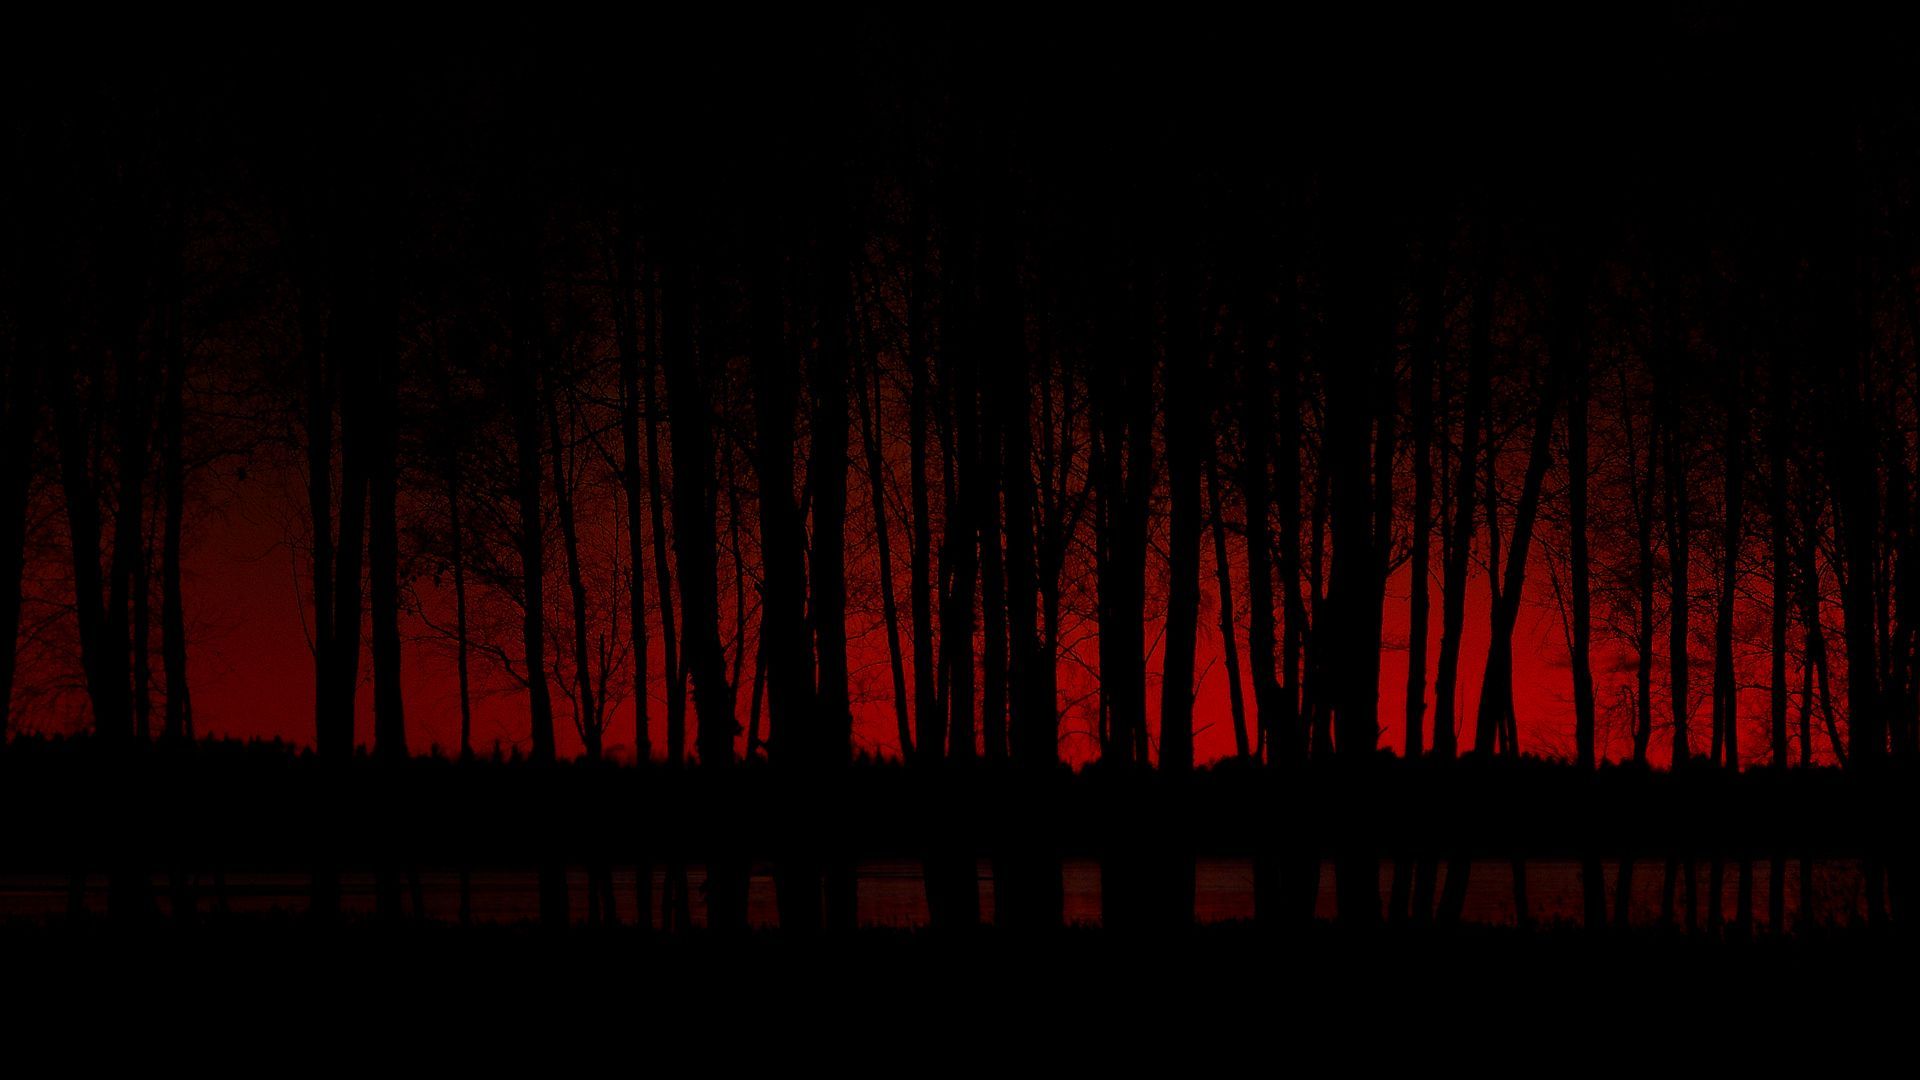 Forest Wallpaper Photo for Desktop Background x px. MB. Forest